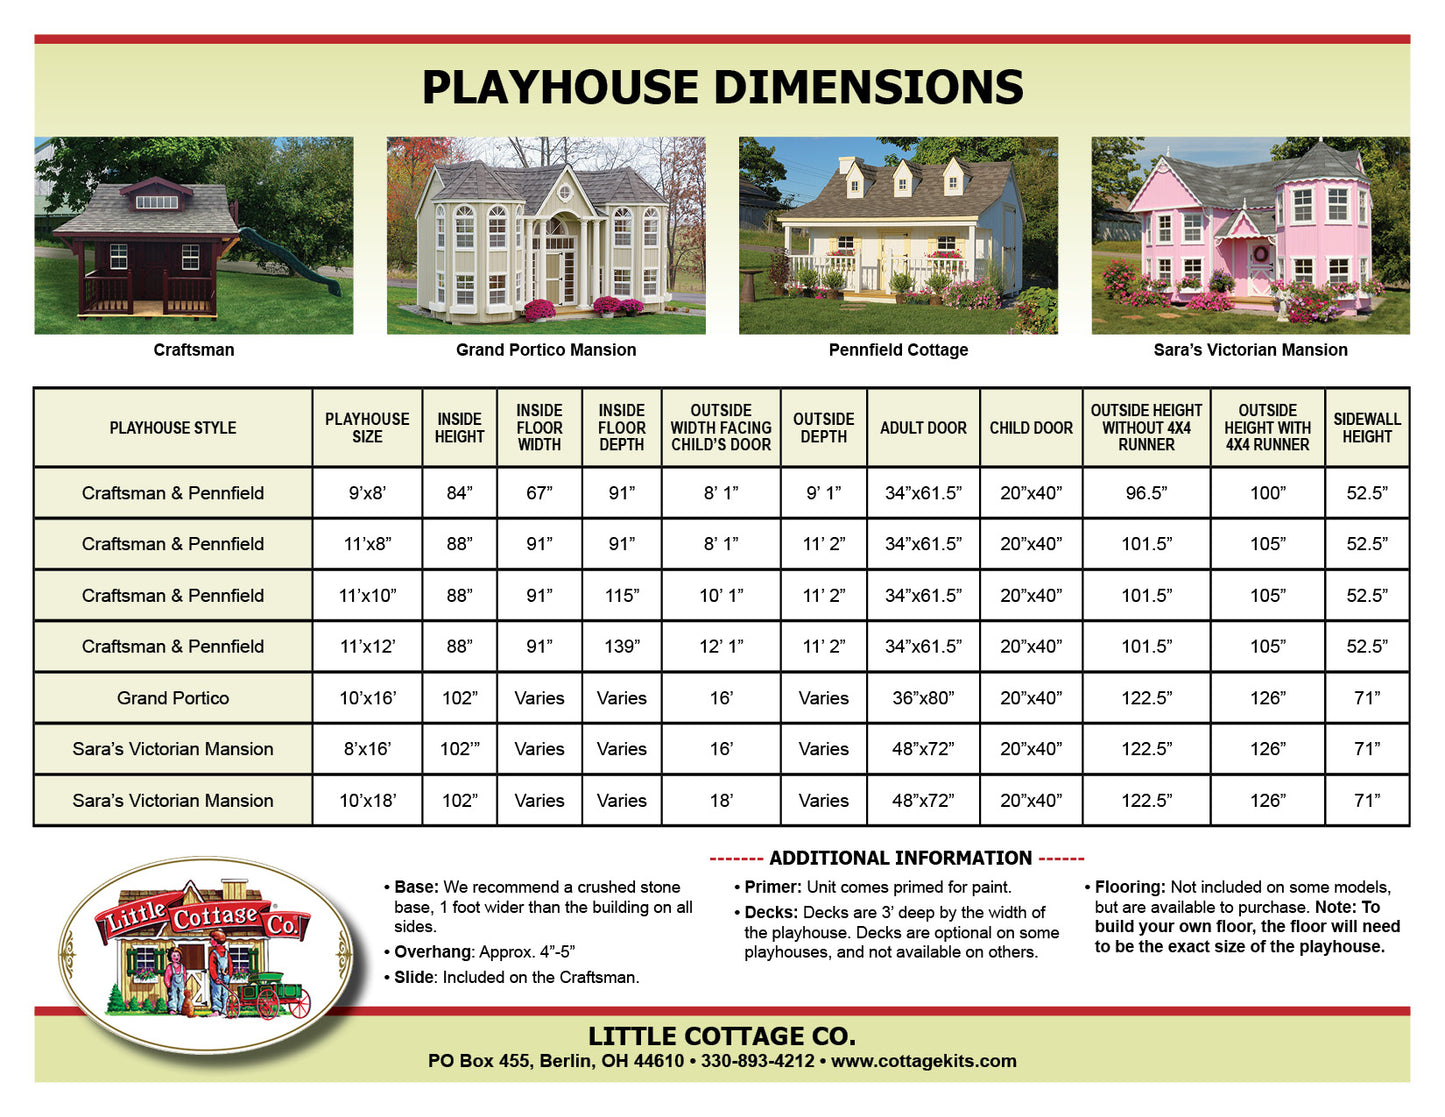 Pennfield Cottage Playhouse